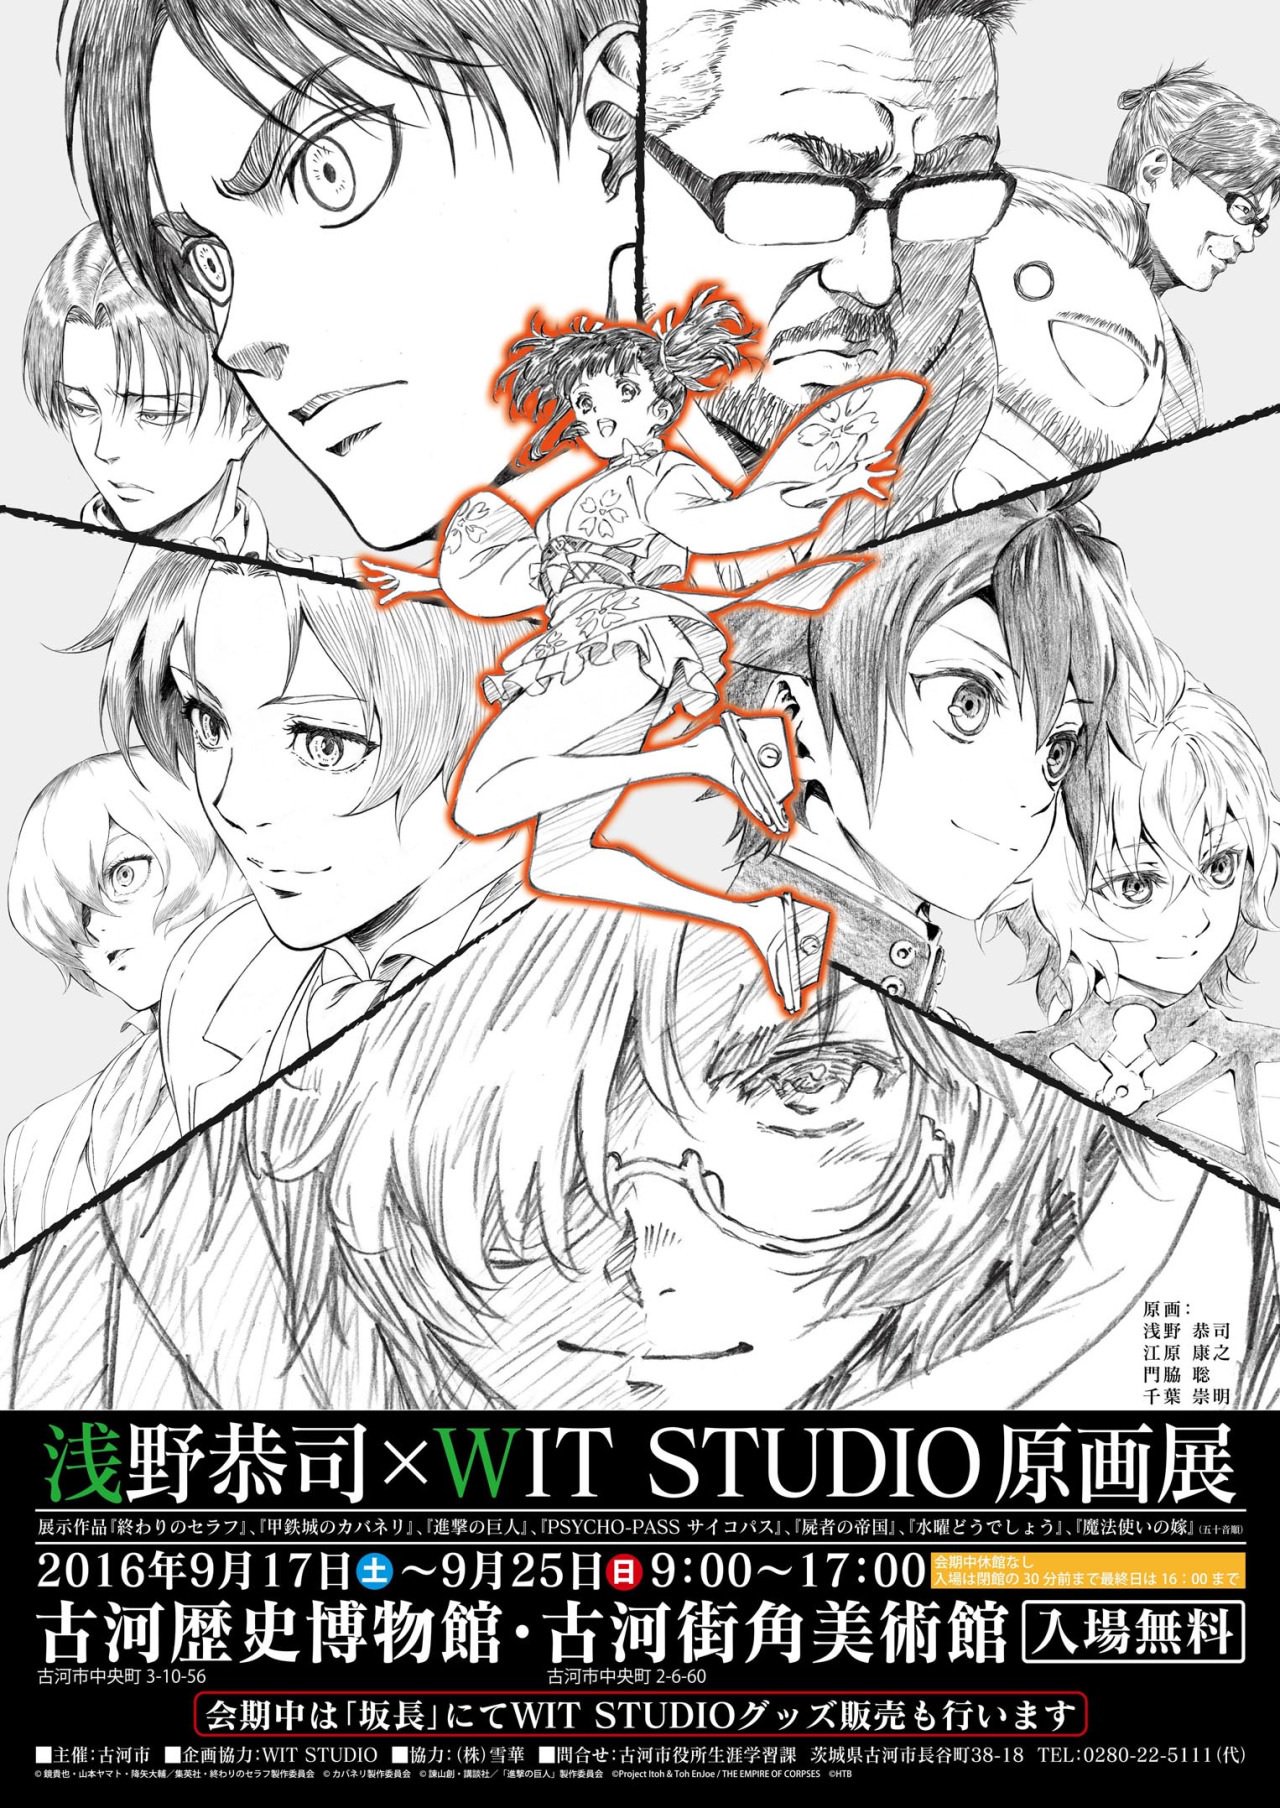 Attack On Fans Asano Kyoji X Wit Studio Exhibition Attackontitan From September 17th To September 25th At Koga History Museum T Co V5ic2rczlj Twitter